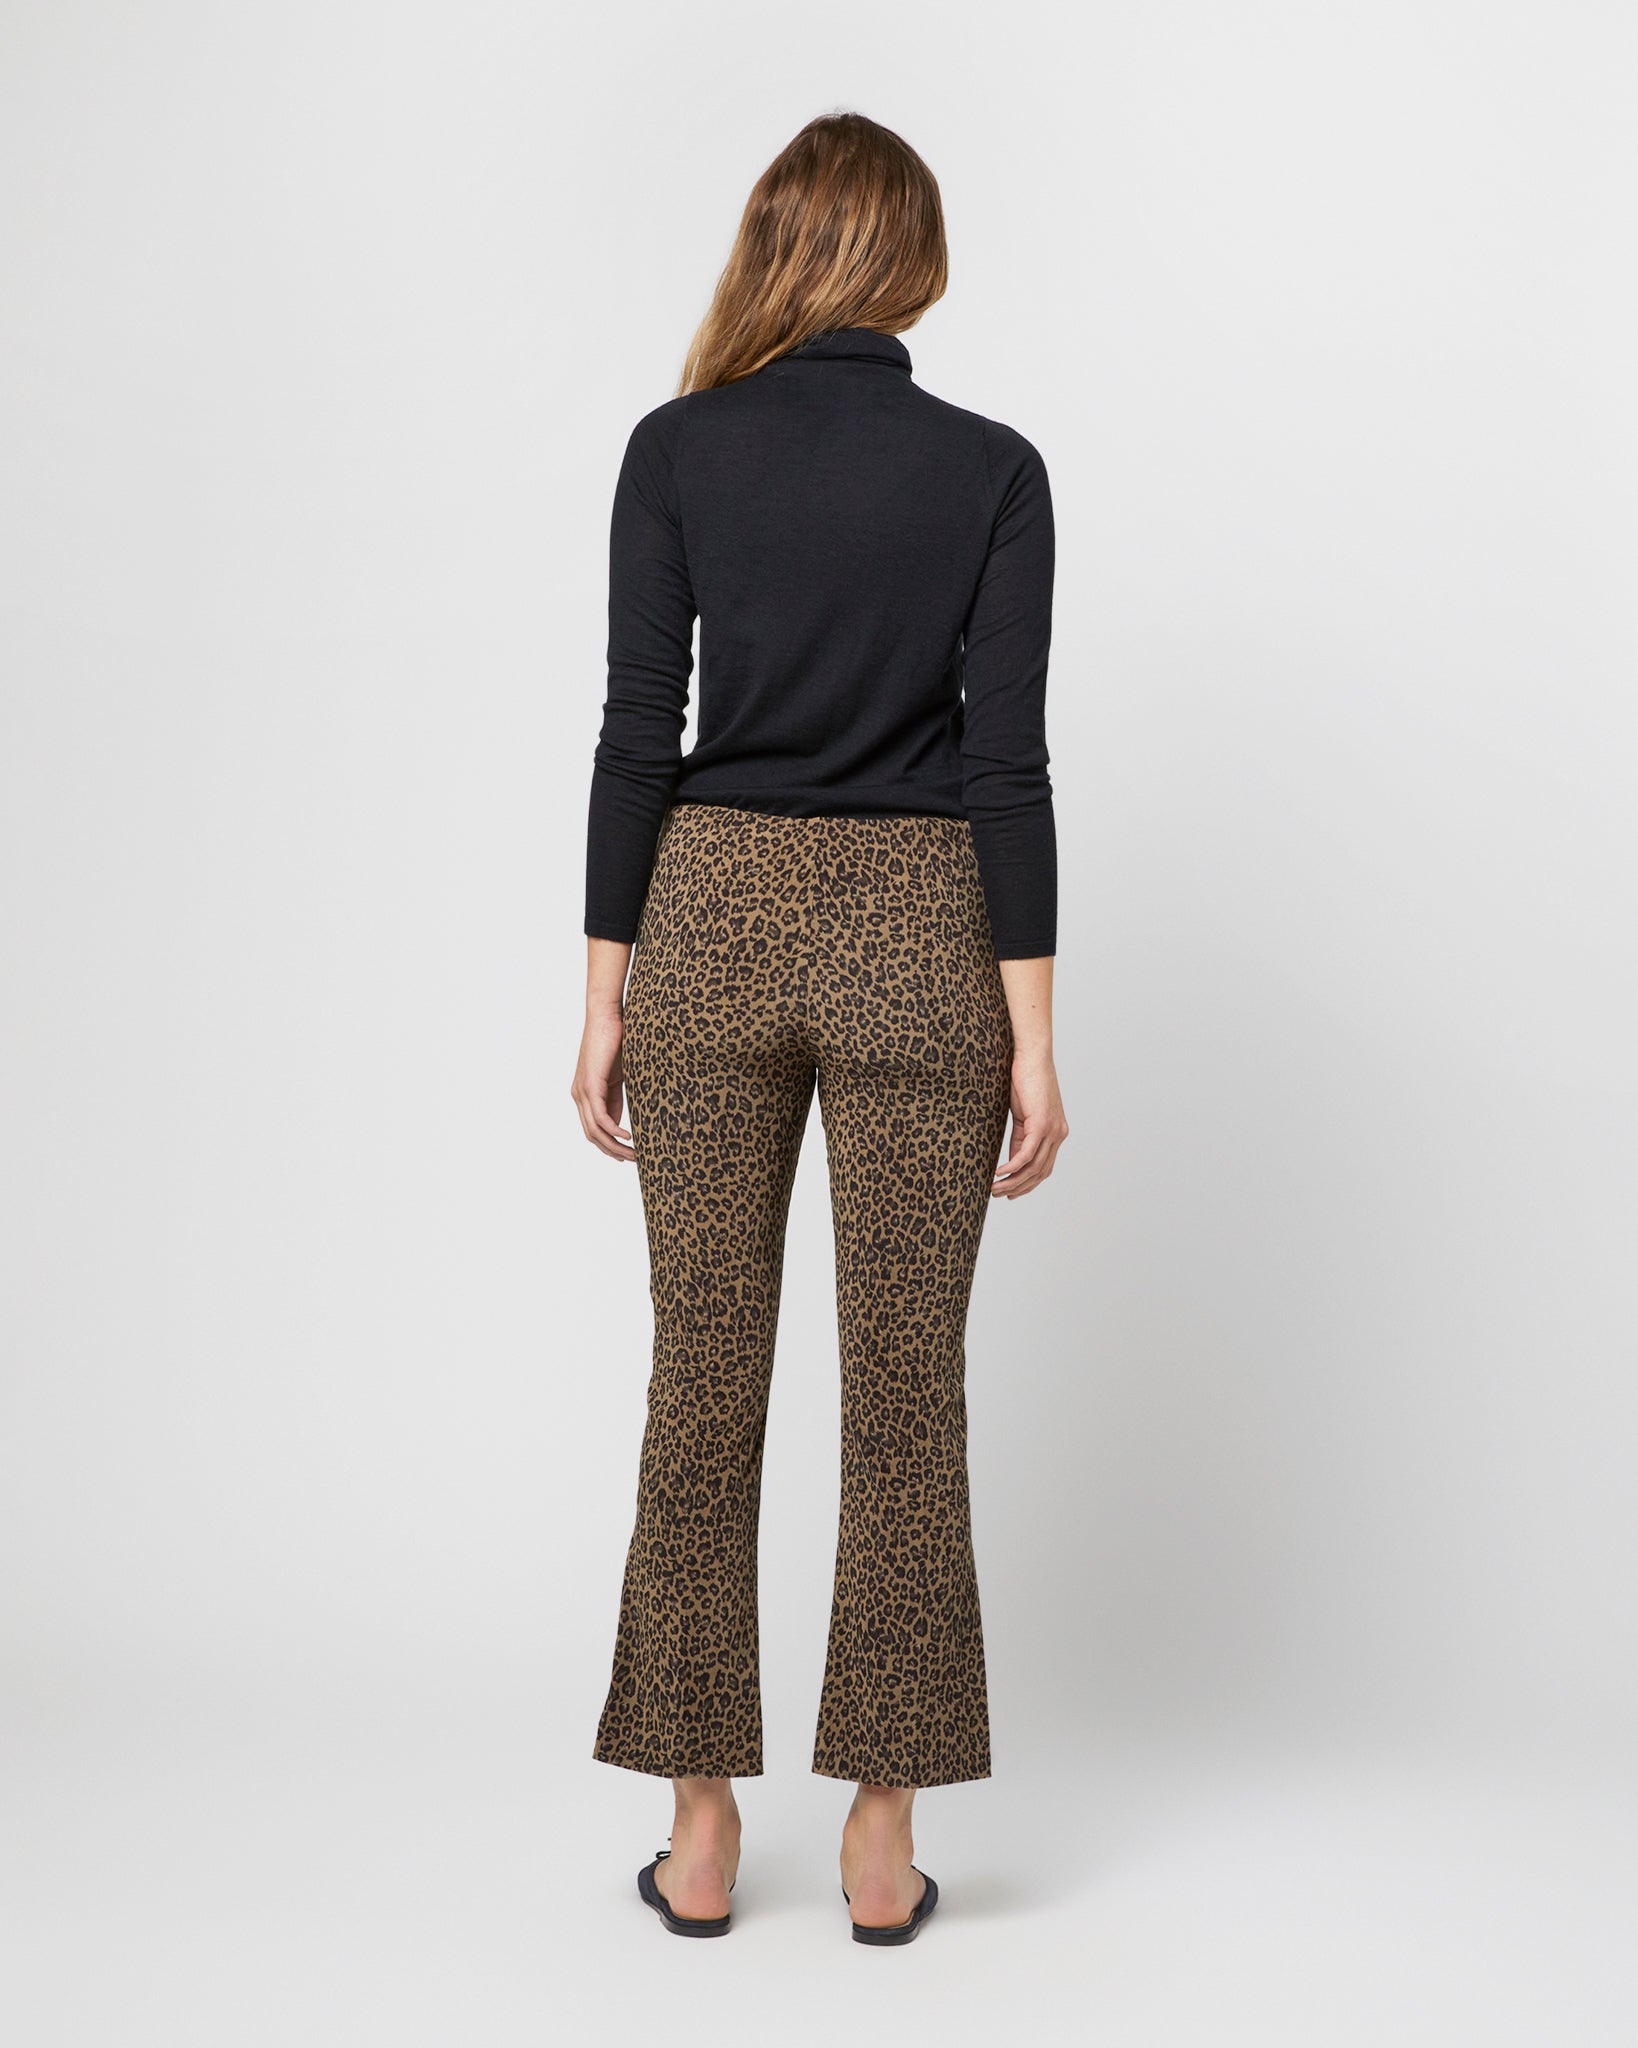 Faye Flare Cropped Pant in Olive Leopard